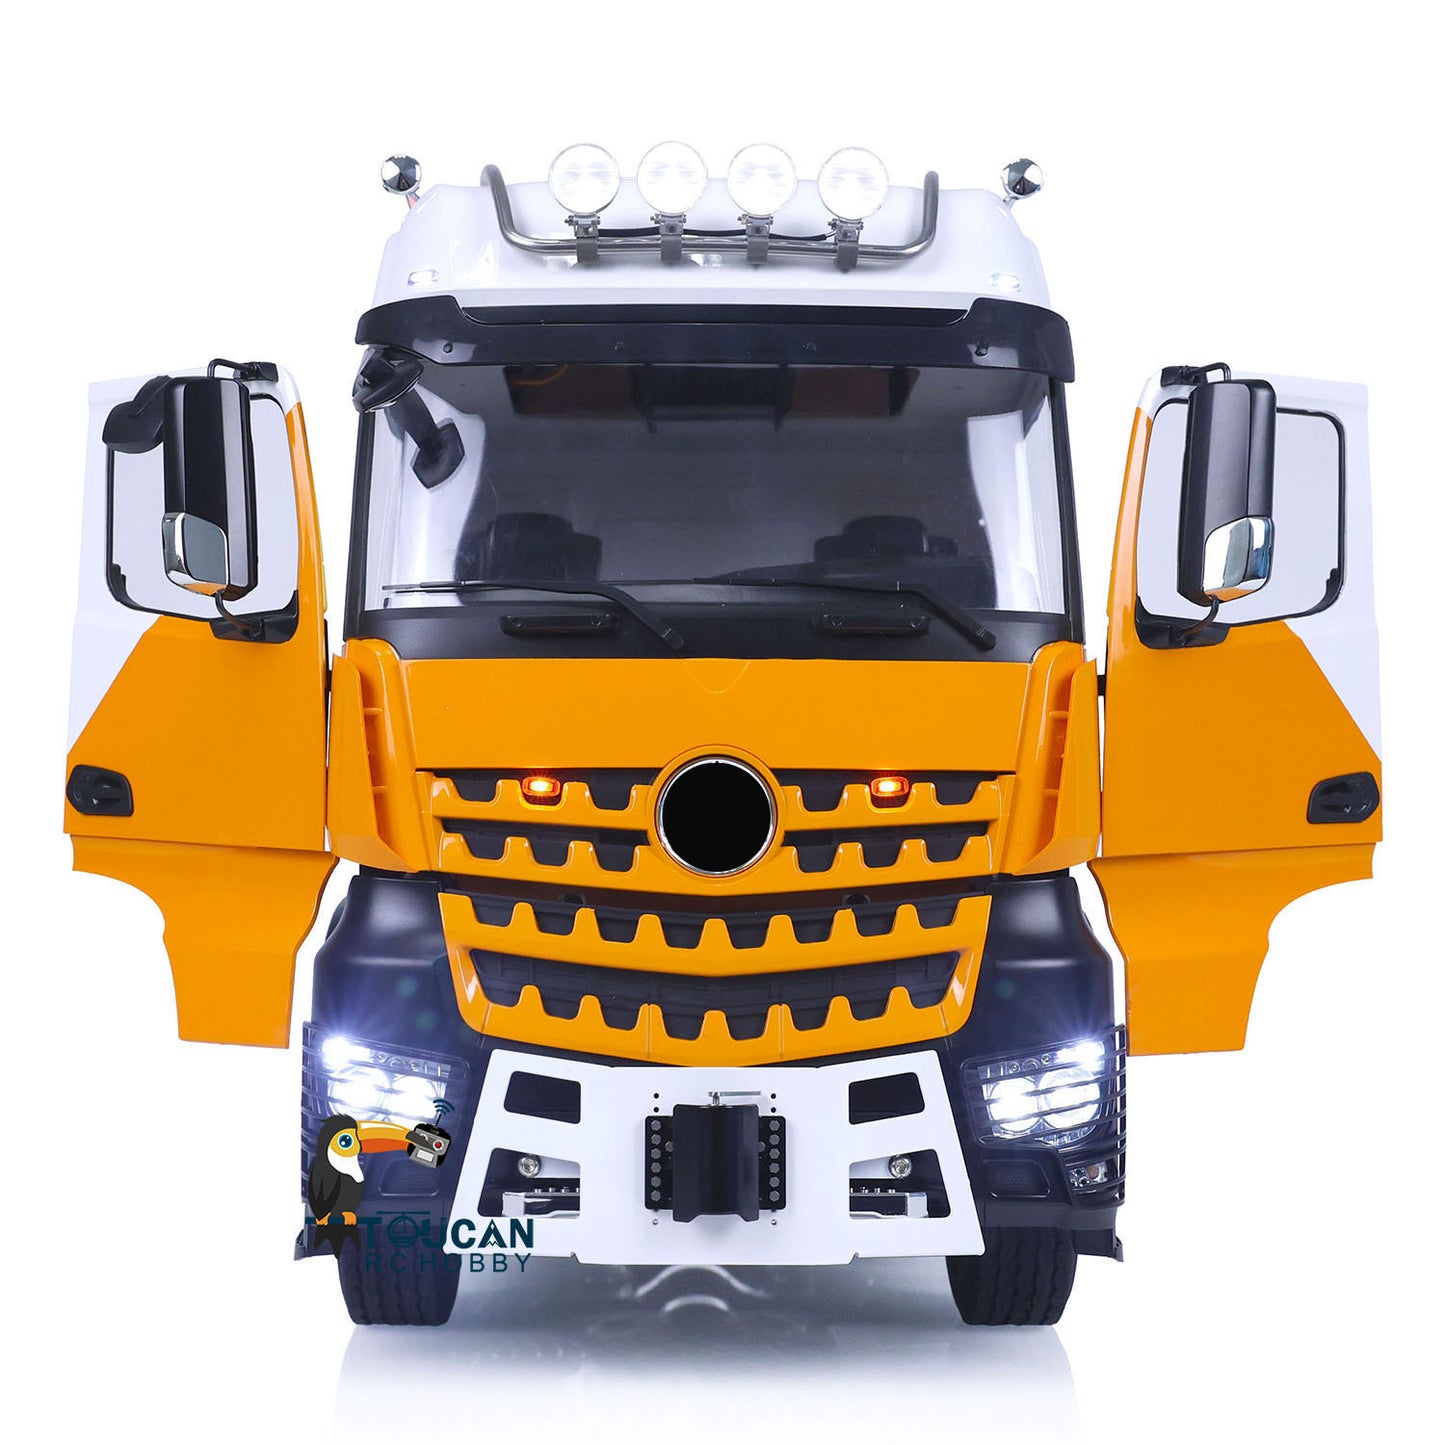 LESU Heavy-duty Metal Chassis RC Highline Tractor Truck for 1/14 DIY 3363 1851 Radio Control Car Battery & Radio System & Charger